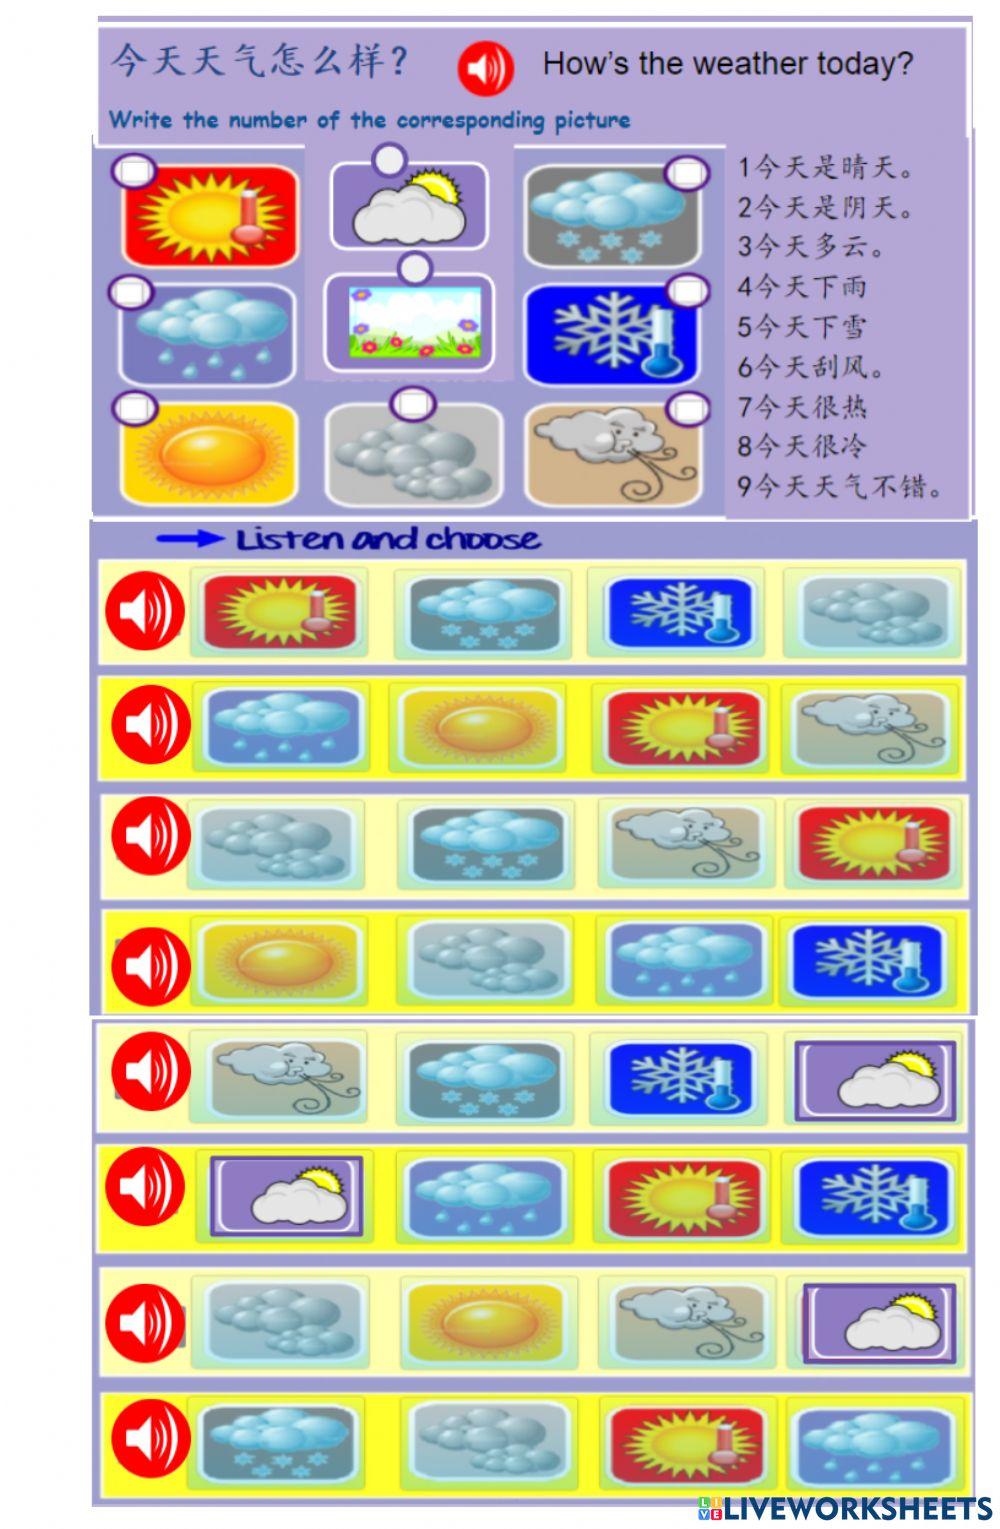 How's the weather 今天天气怎么样